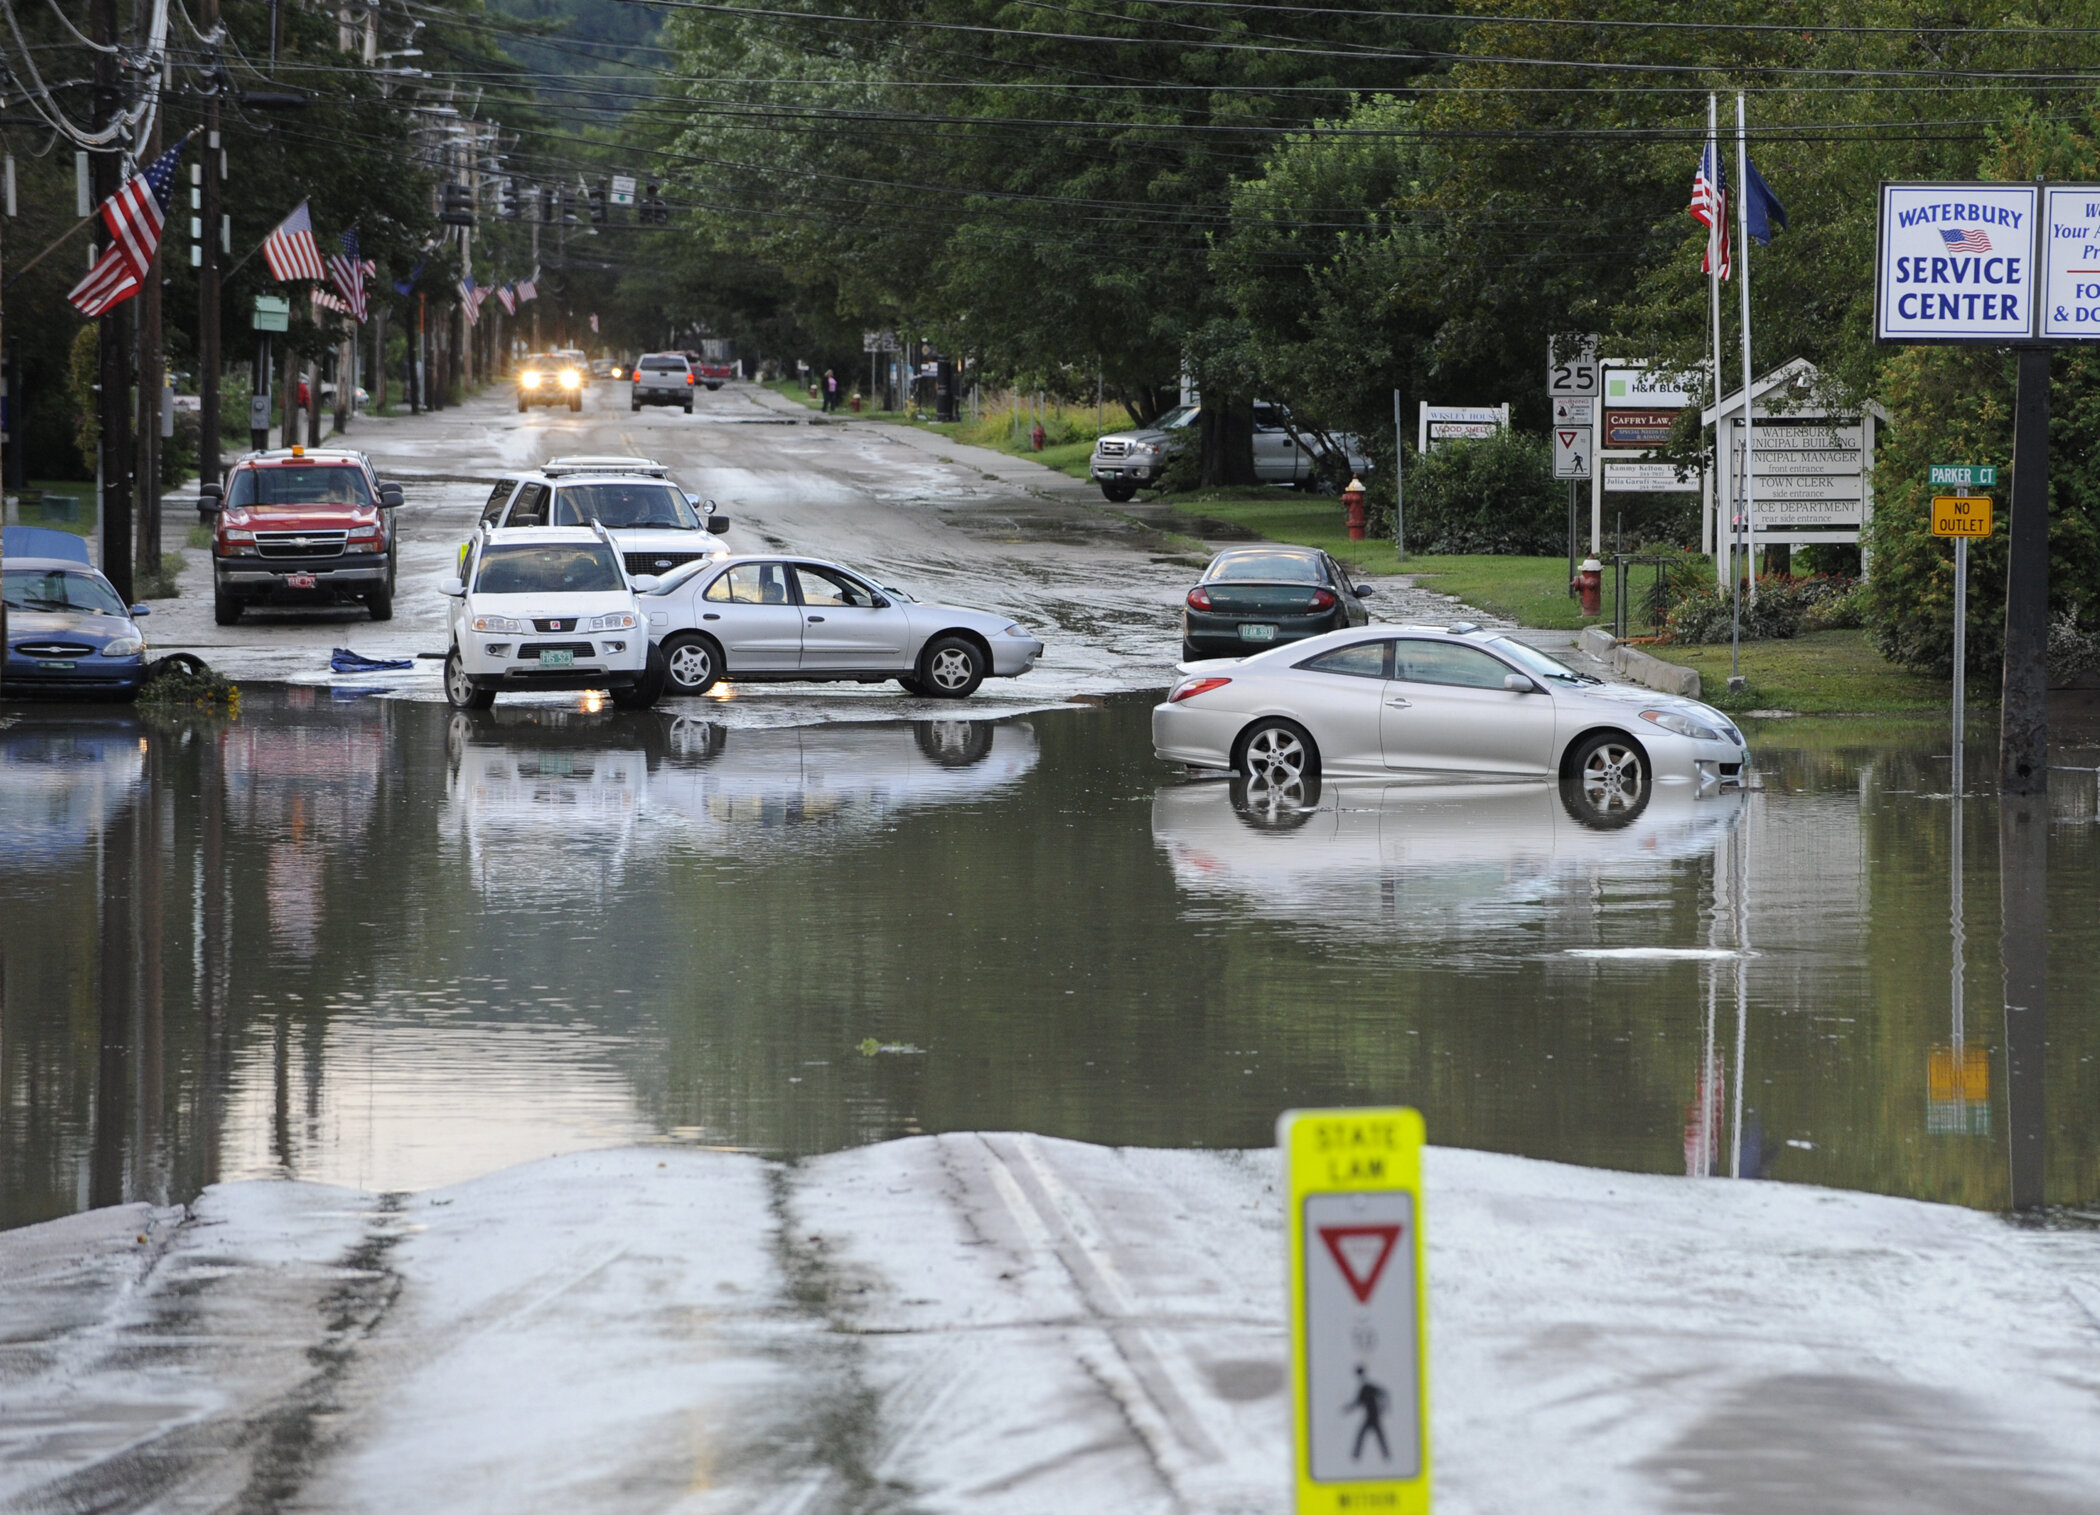  People try to navigate Main Street as the water recedes. Photo by Gordon Miller 